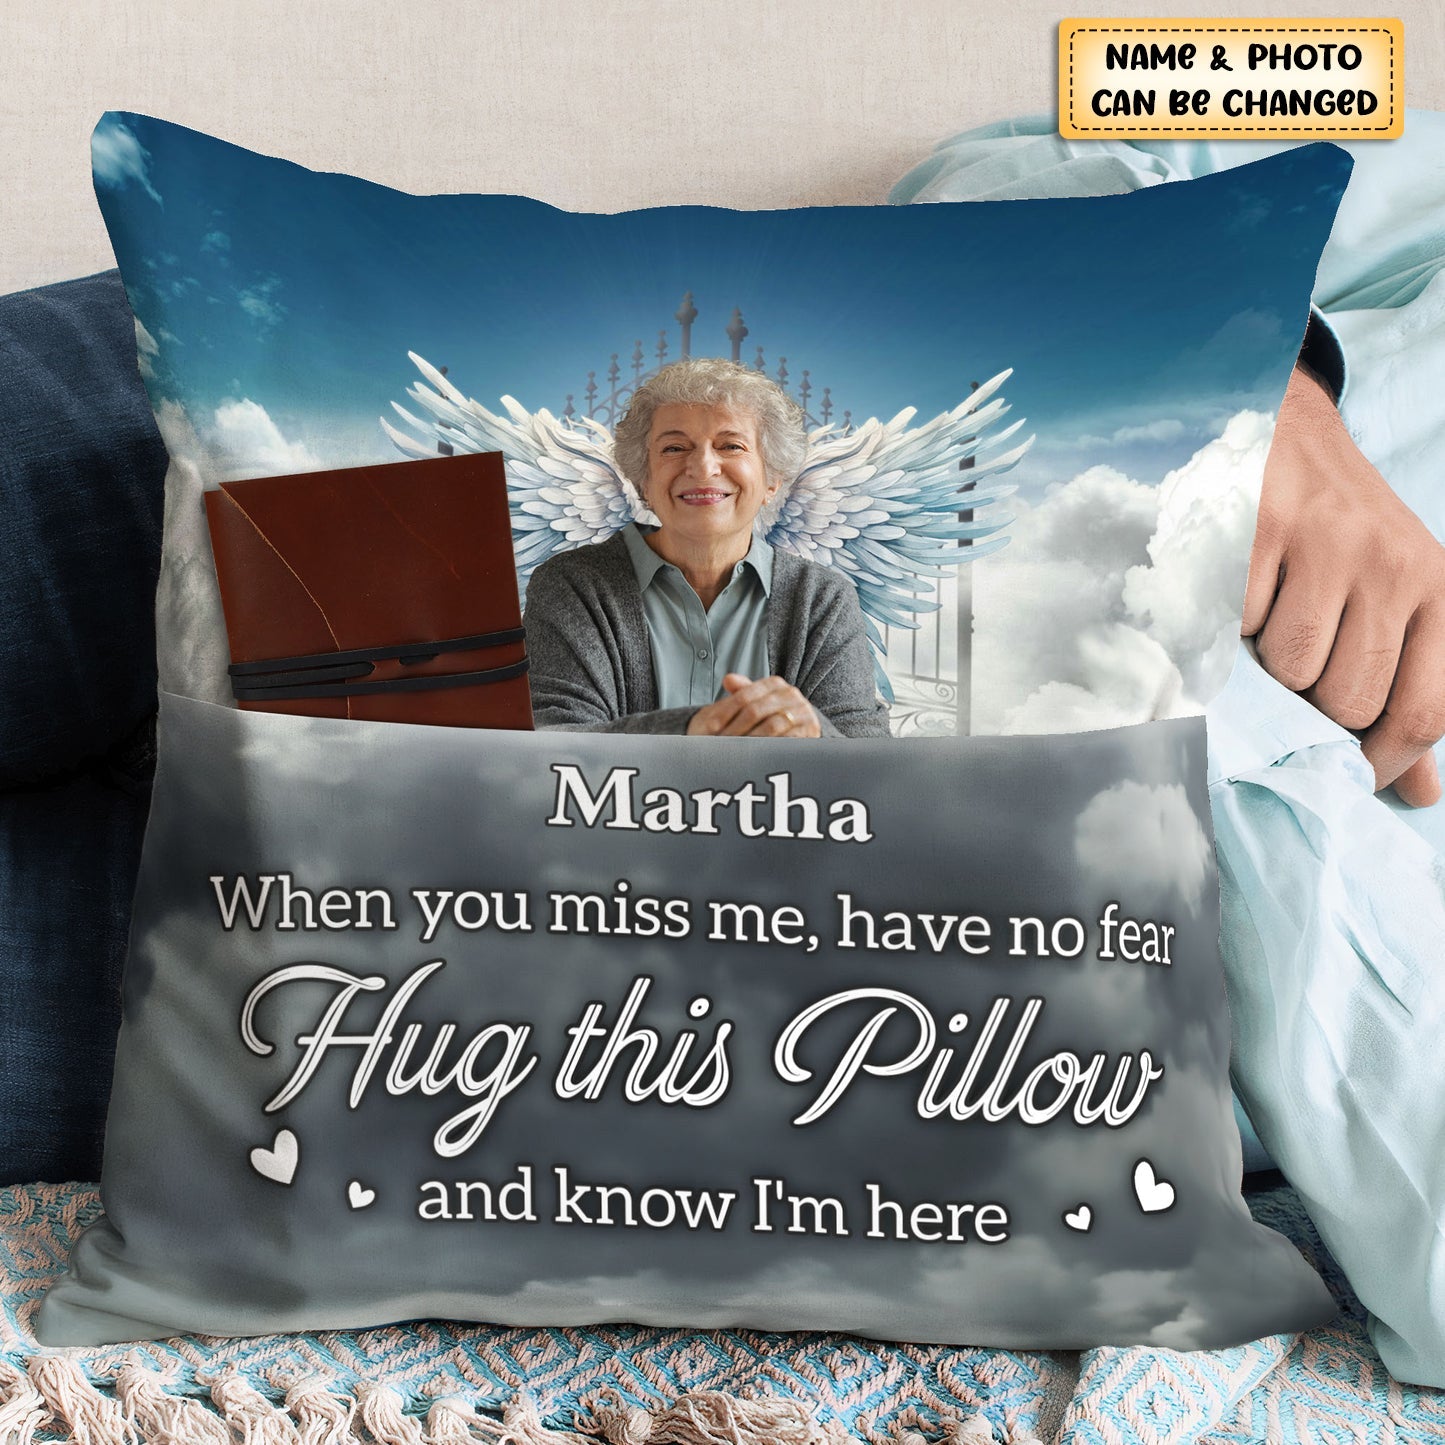 Hug This Pillow - Personalized Photo Pocket Pillow